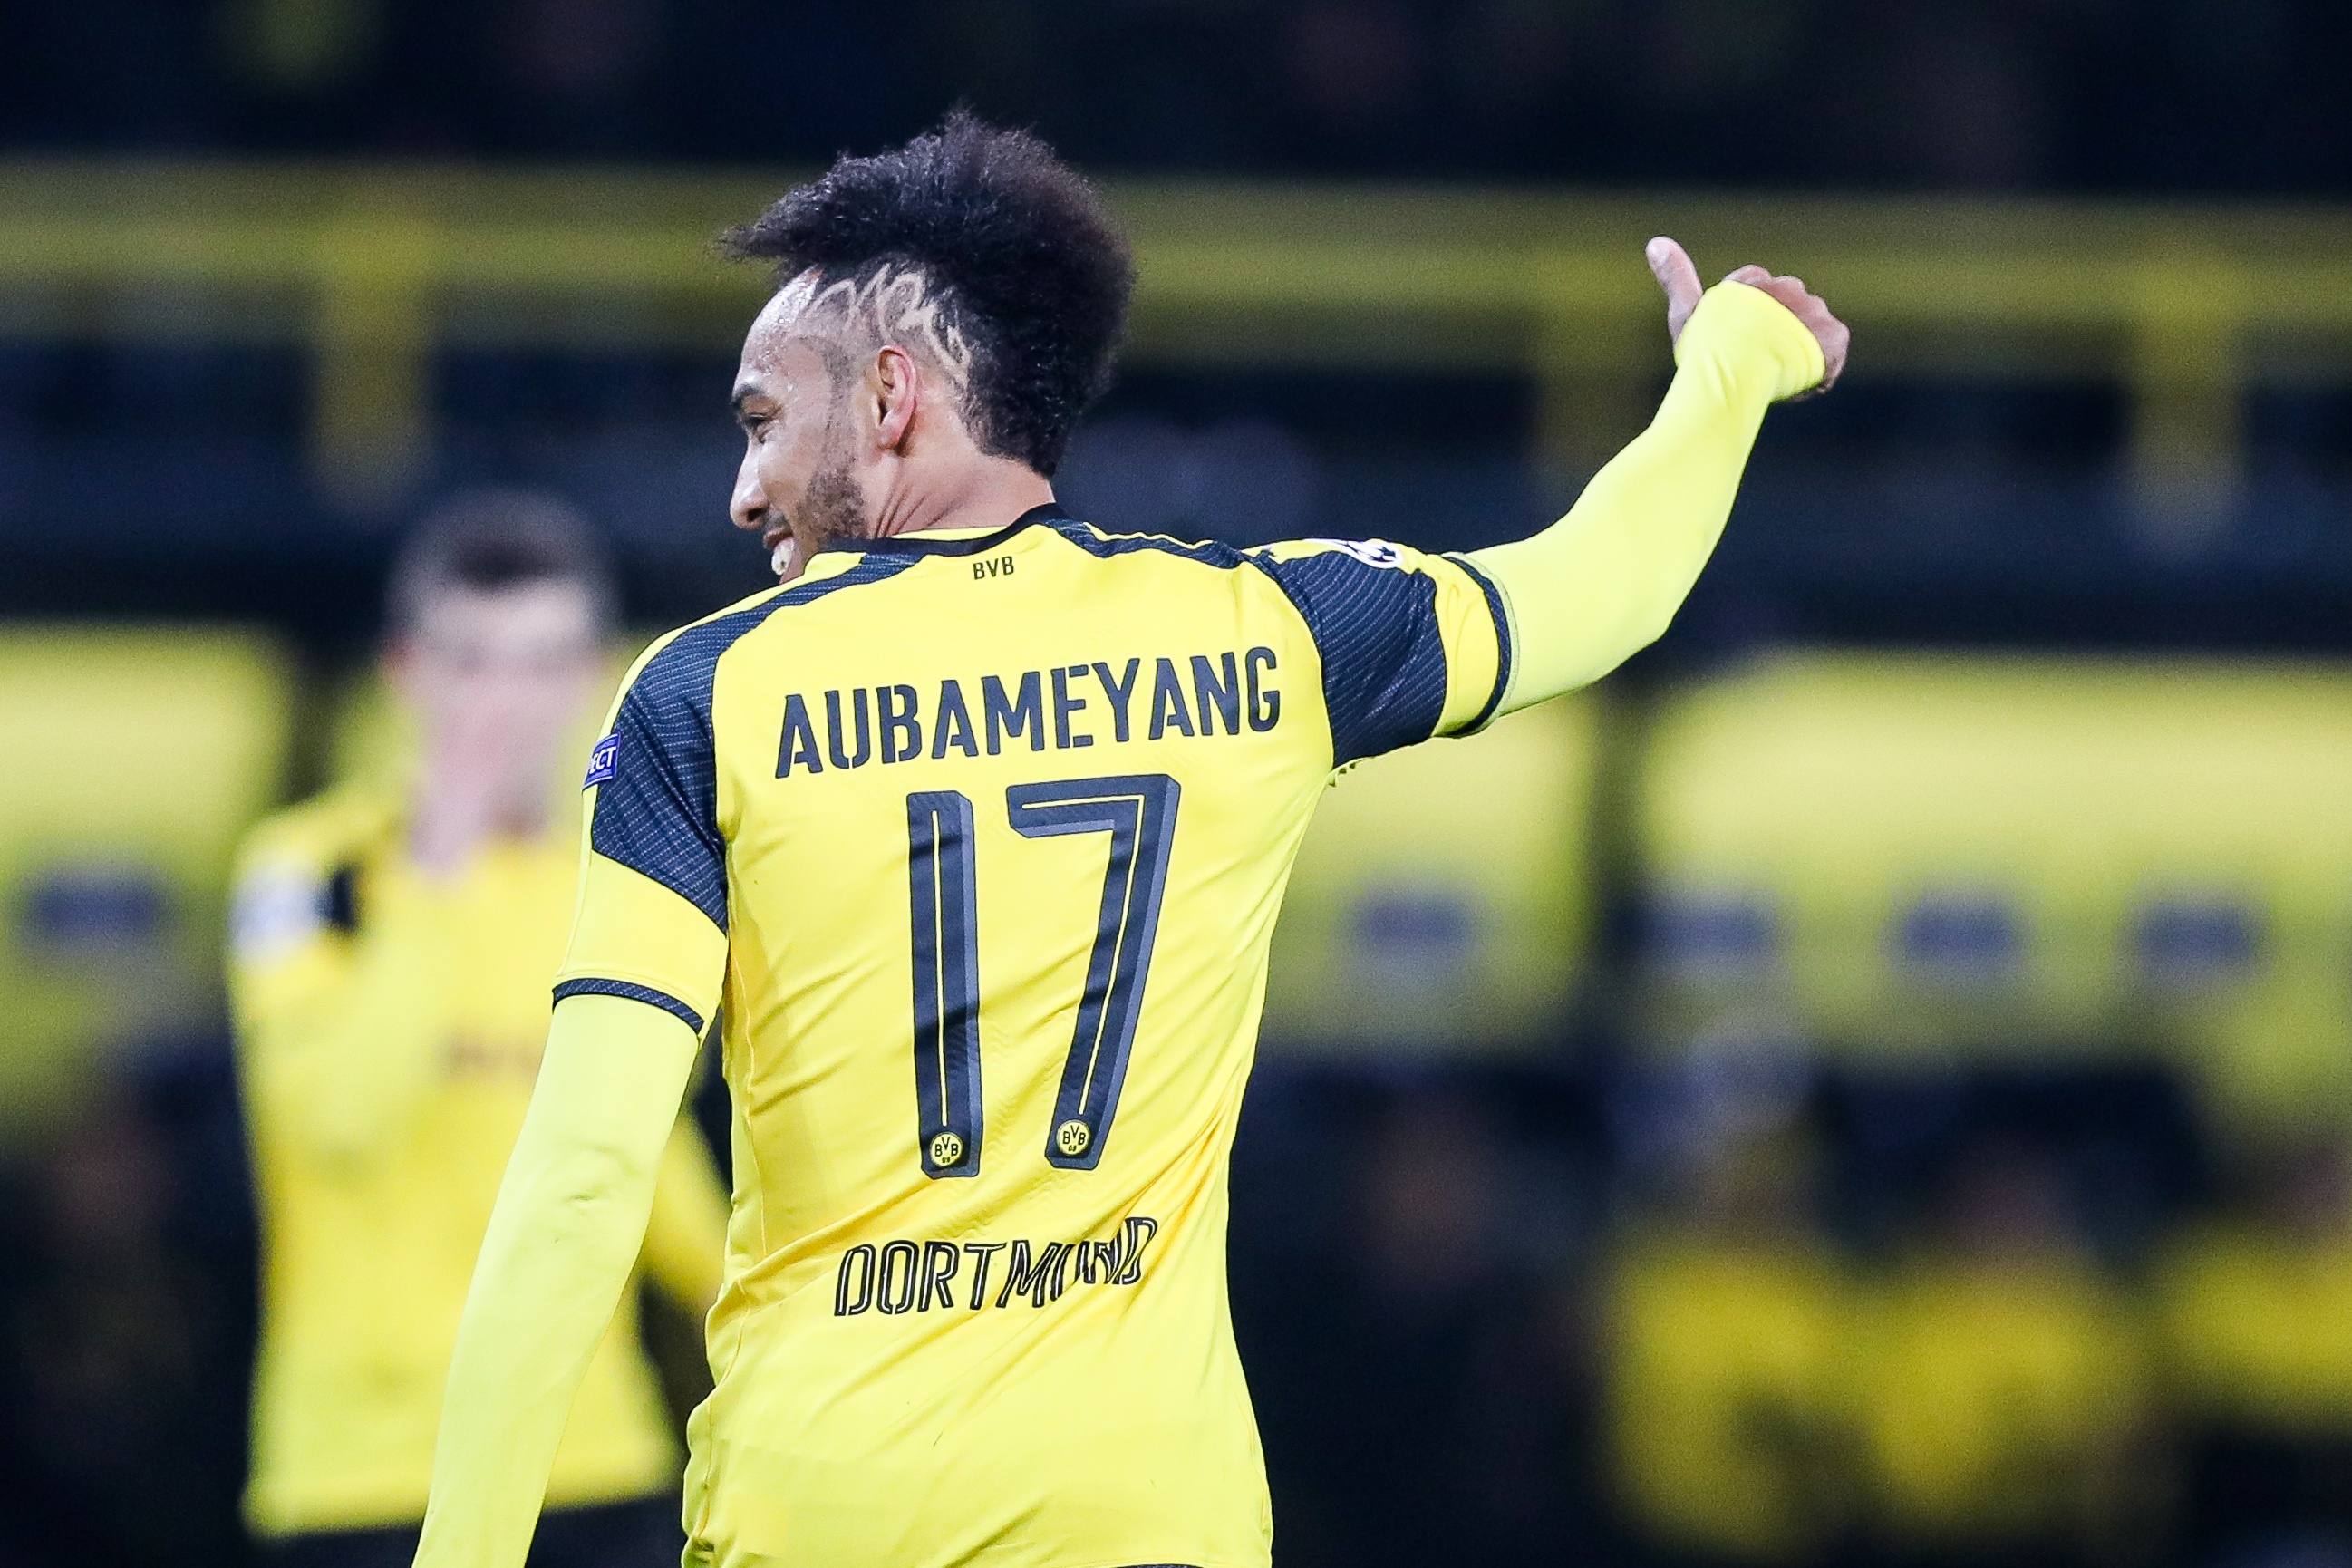 DORTMUND, GERMANY - MARCH 08: Pierre-Emerick Aubameyang of Dortmund reacts during the UEFA Champions League Round of 16 second leg match between Borussia Dortmund and  SL Benfica at Signal Iduna Park on March 8, 2017 in Dortmund, Germany. (Photo by Maja Hitij/Bongarts/Getty Images)